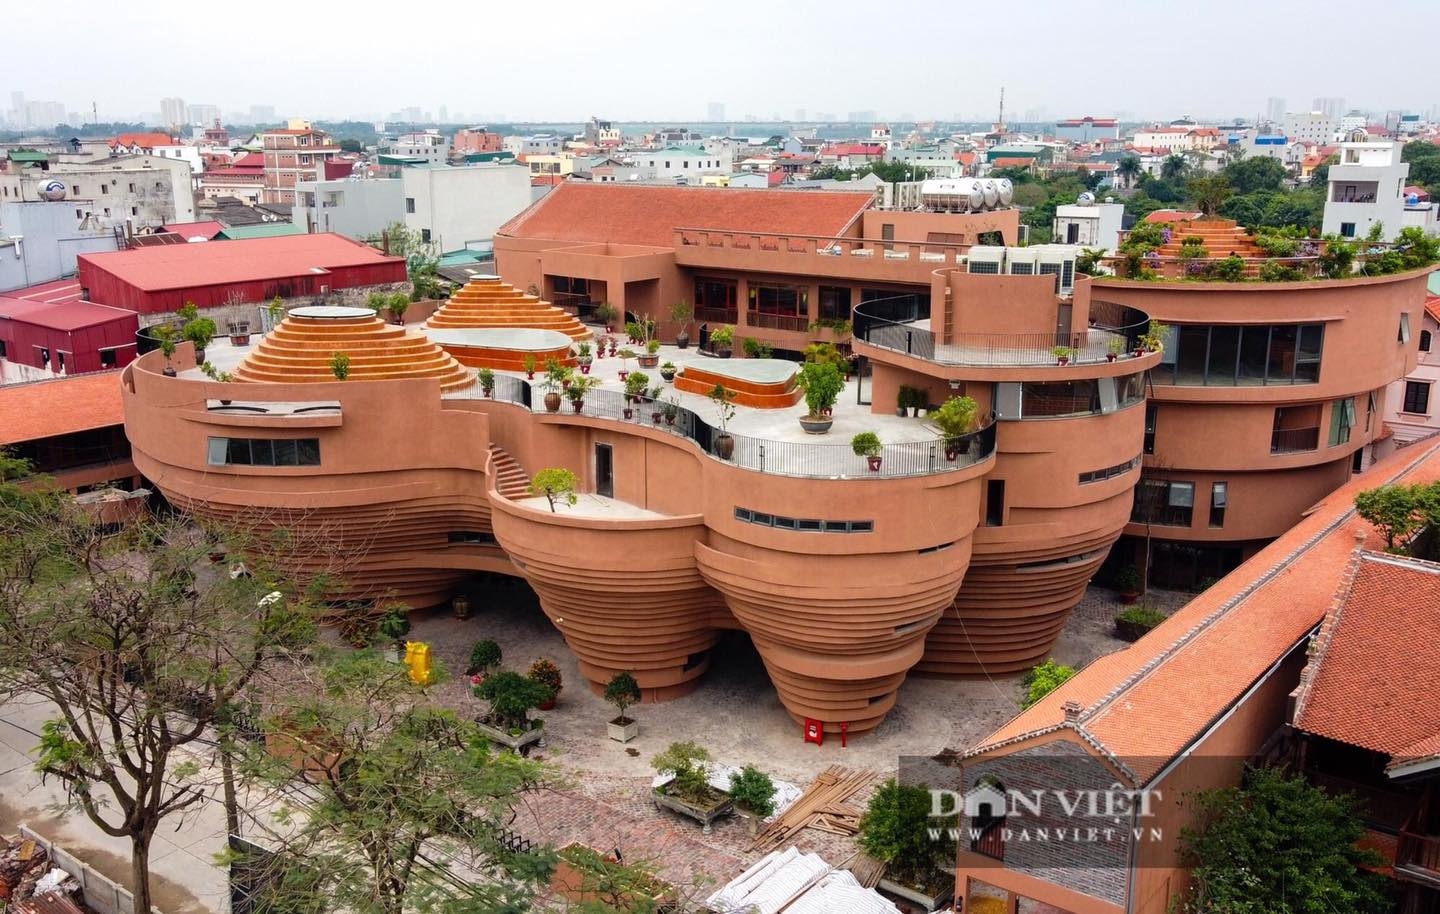 Check out brand new Bat Trang Ceramic Museum in outskirt Hanoi